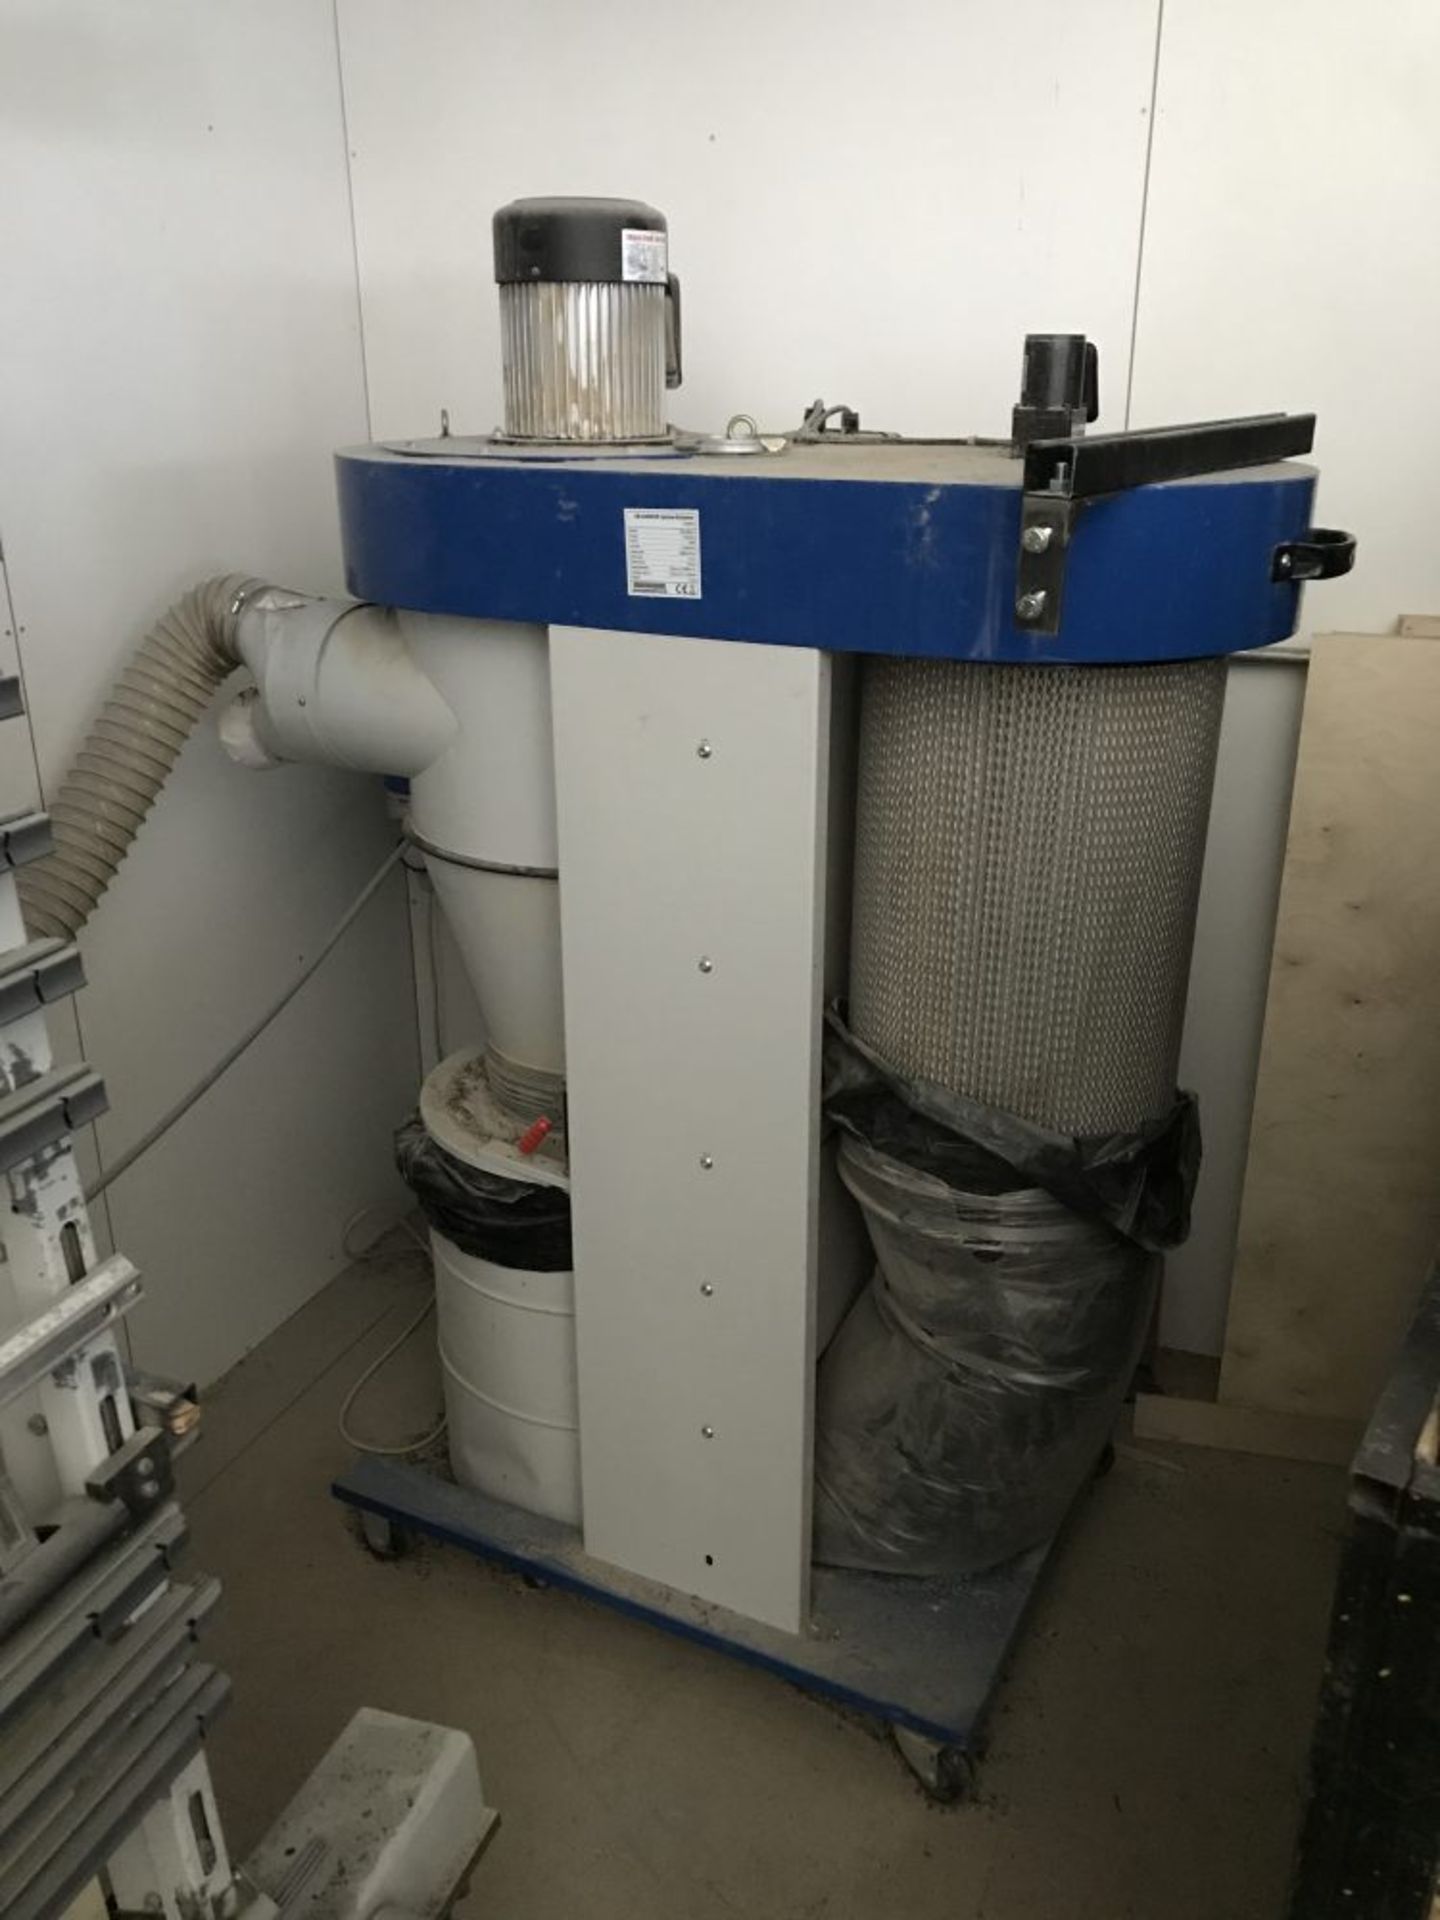 Axminster UB-2200ECK cylone dust extractor